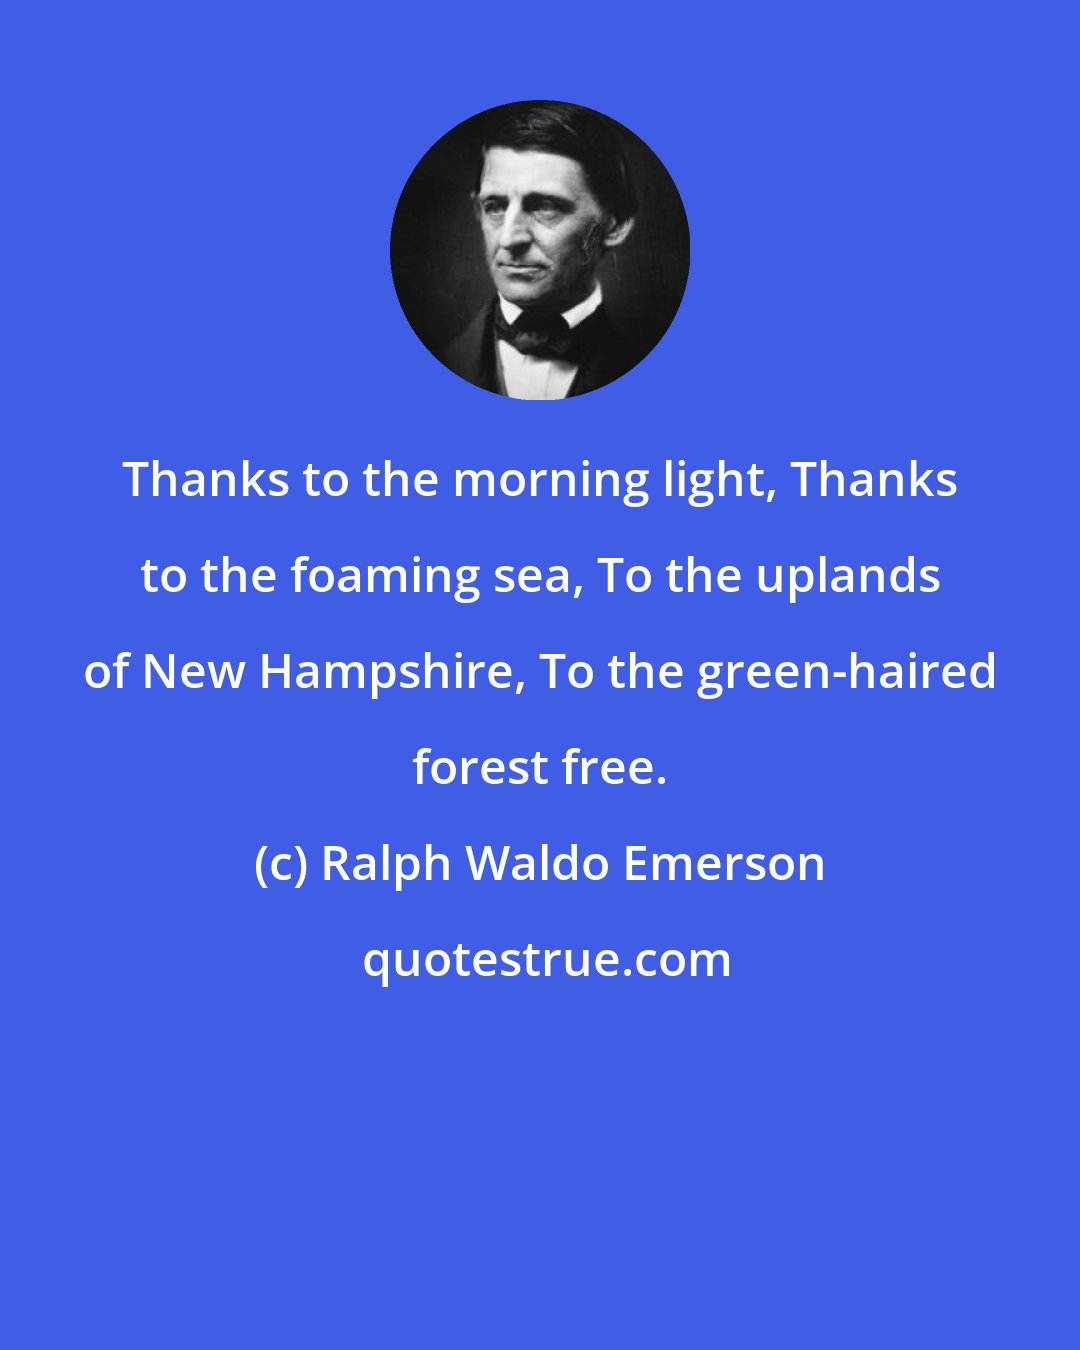 Ralph Waldo Emerson: Thanks to the morning light, Thanks to the foaming sea, To the uplands of New Hampshire, To the green-haired forest free.